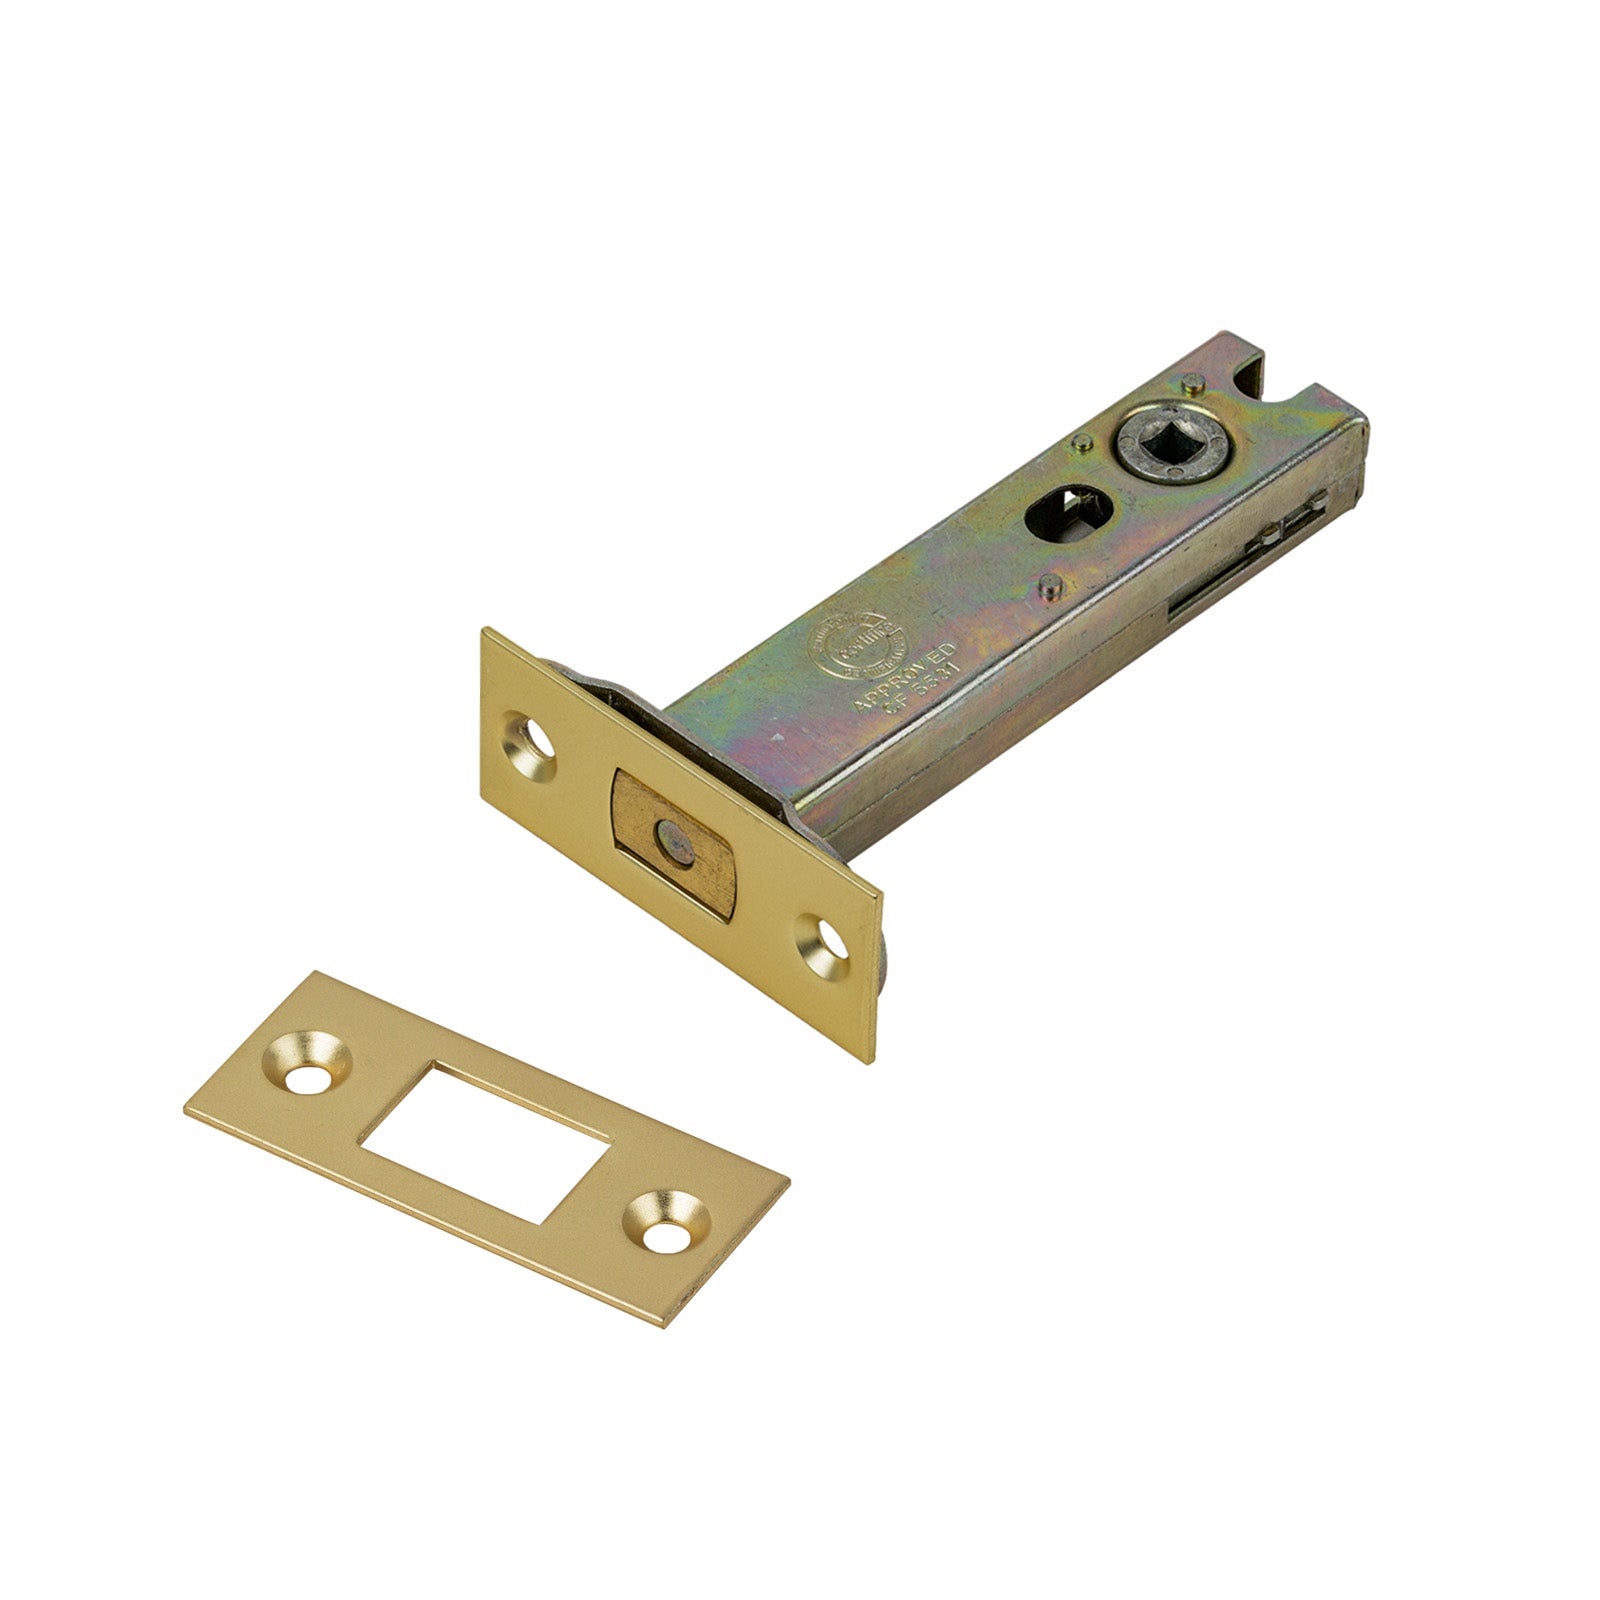 SHOW Bathroom Deadbolt - 4 Inch with Satin Brass finished forend and striker plate